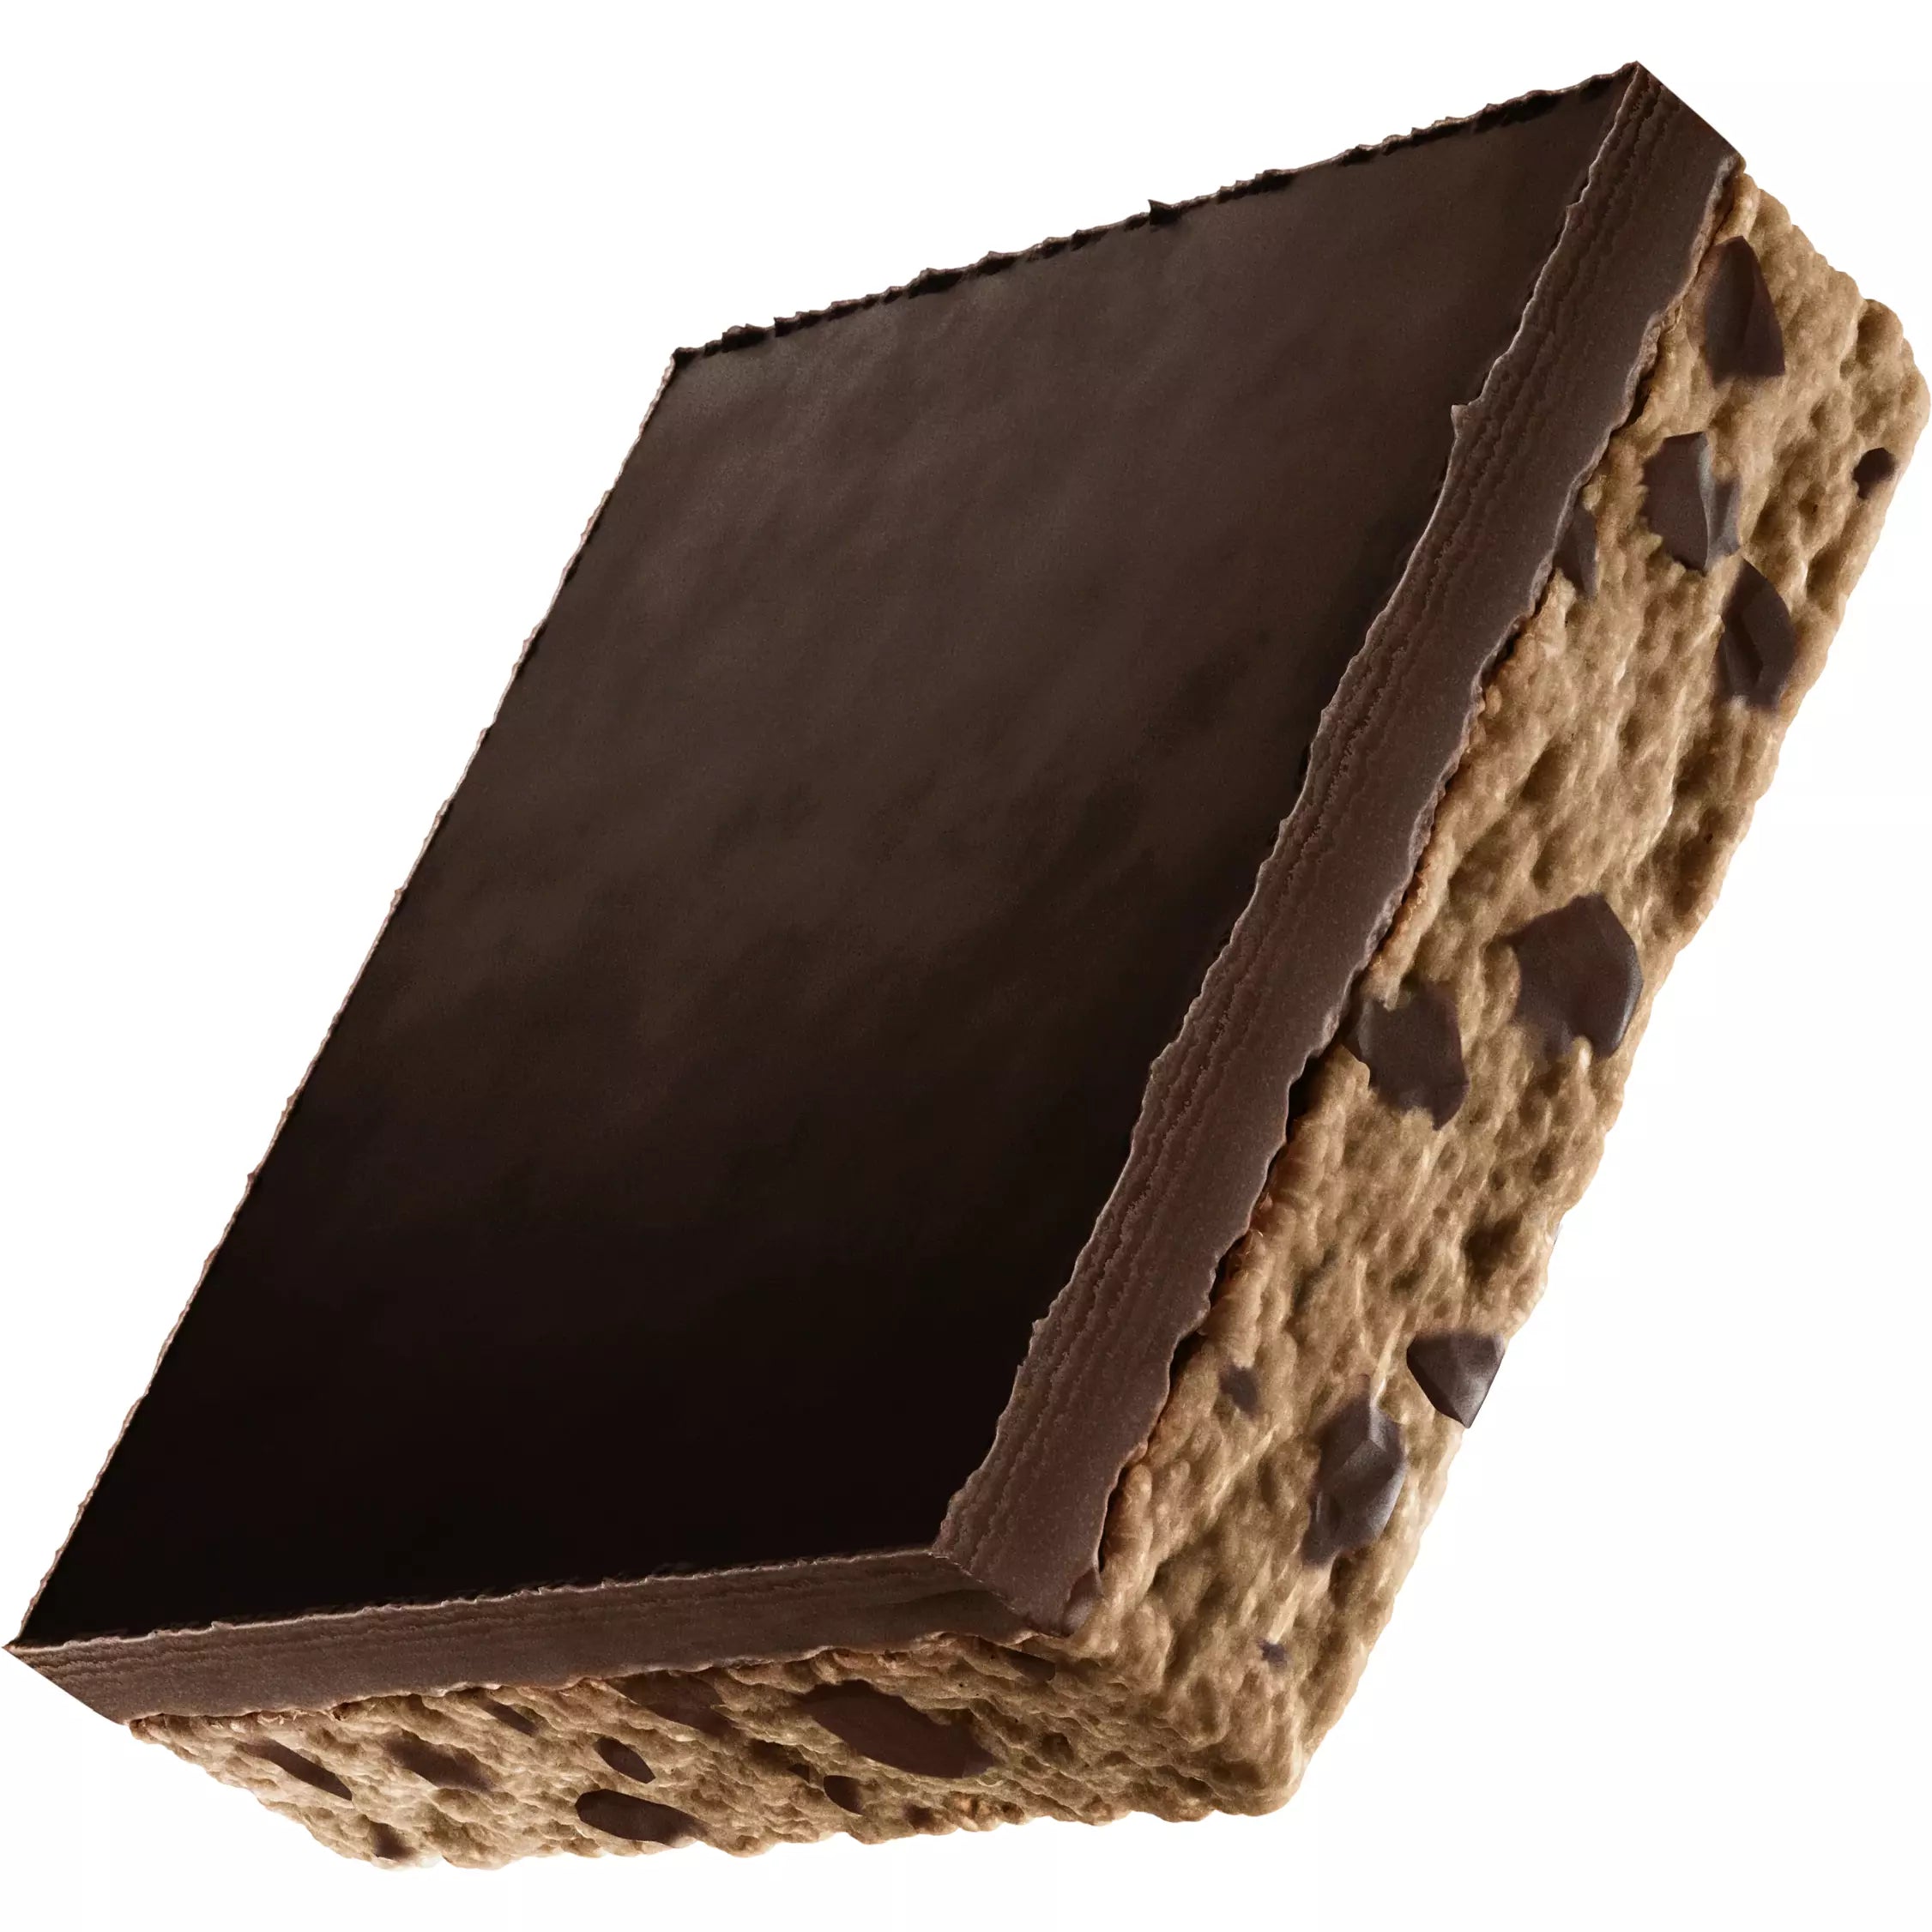 Mid-Day Squares NEW FORMAT (1 pack of 12 squares) Protein Snacks Almond Crunch,Brownie Batter,Peanut Butta,Cookie Dough Mid-Day Squares mid-day-squares-new-format-1-pack-of-12-squares